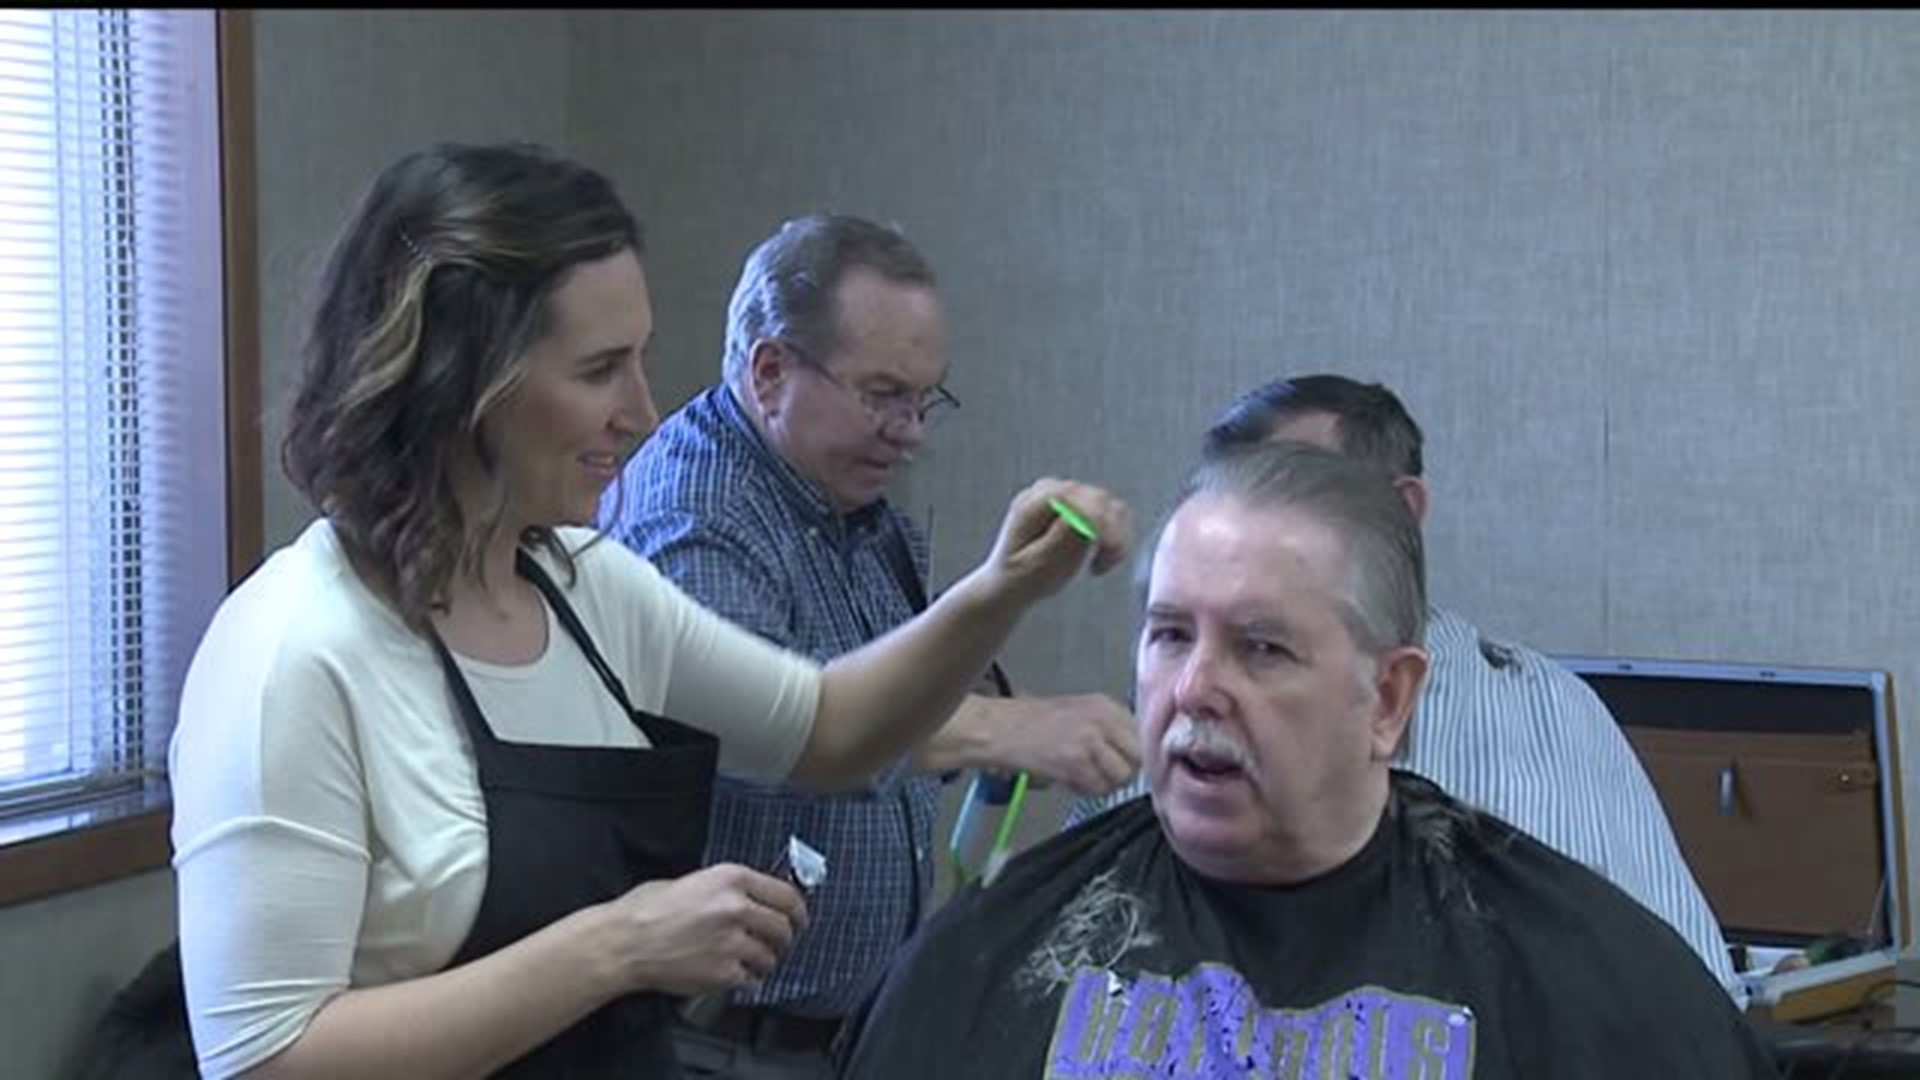 Free haircuts for Veterans